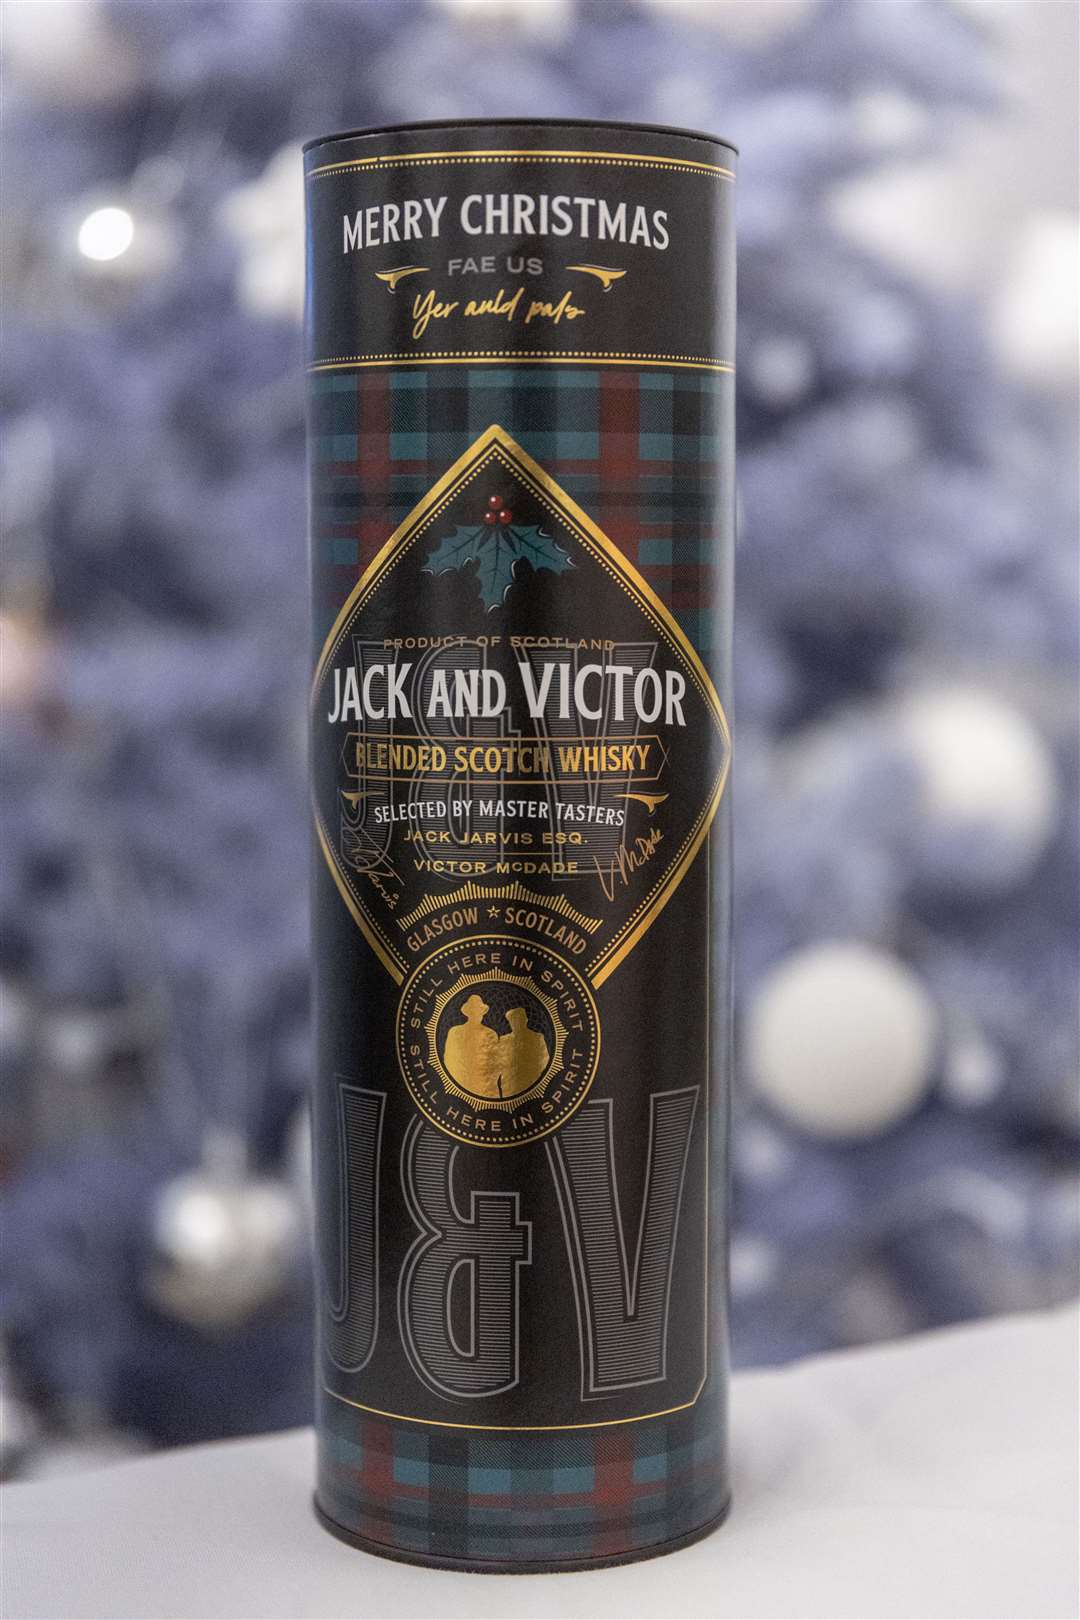 Jack and Victor whisky.